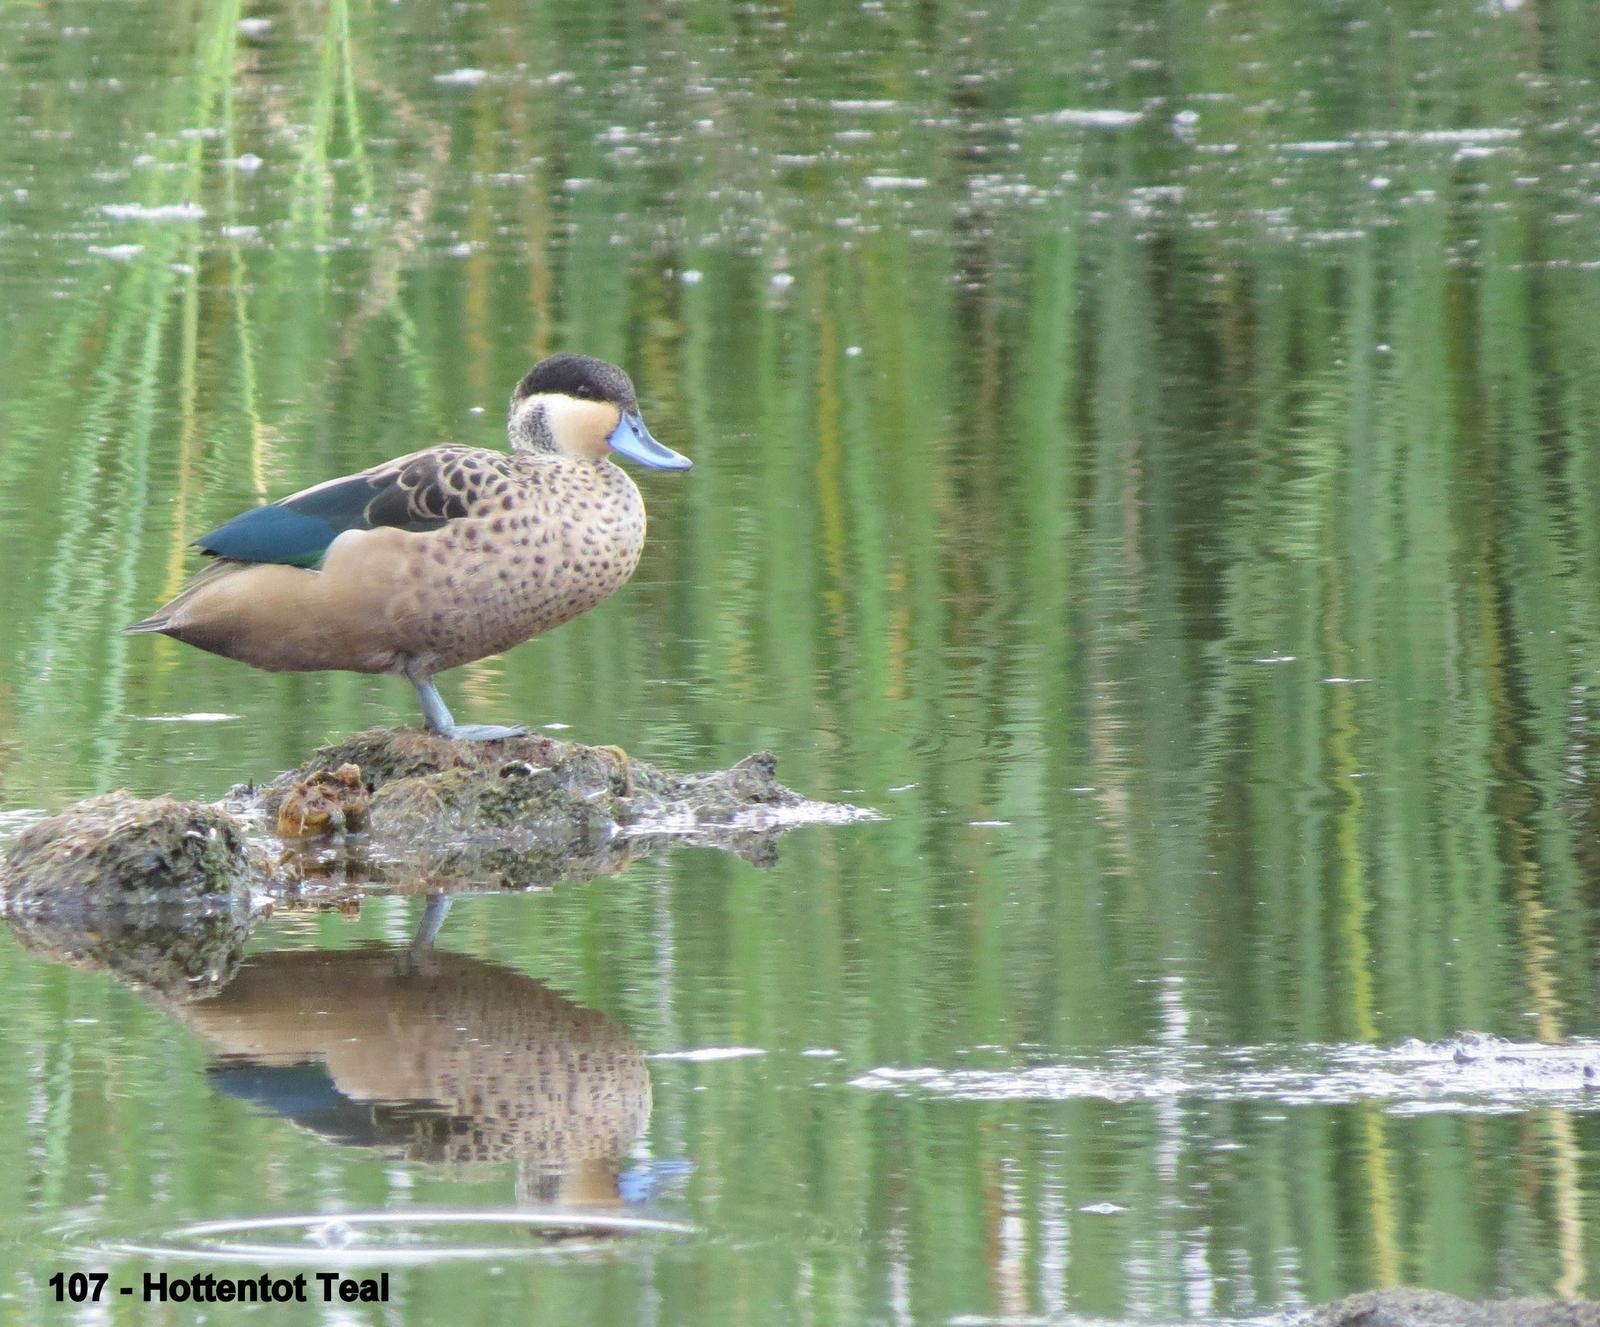 Hottentot Teal Photo by Richard  Lowe